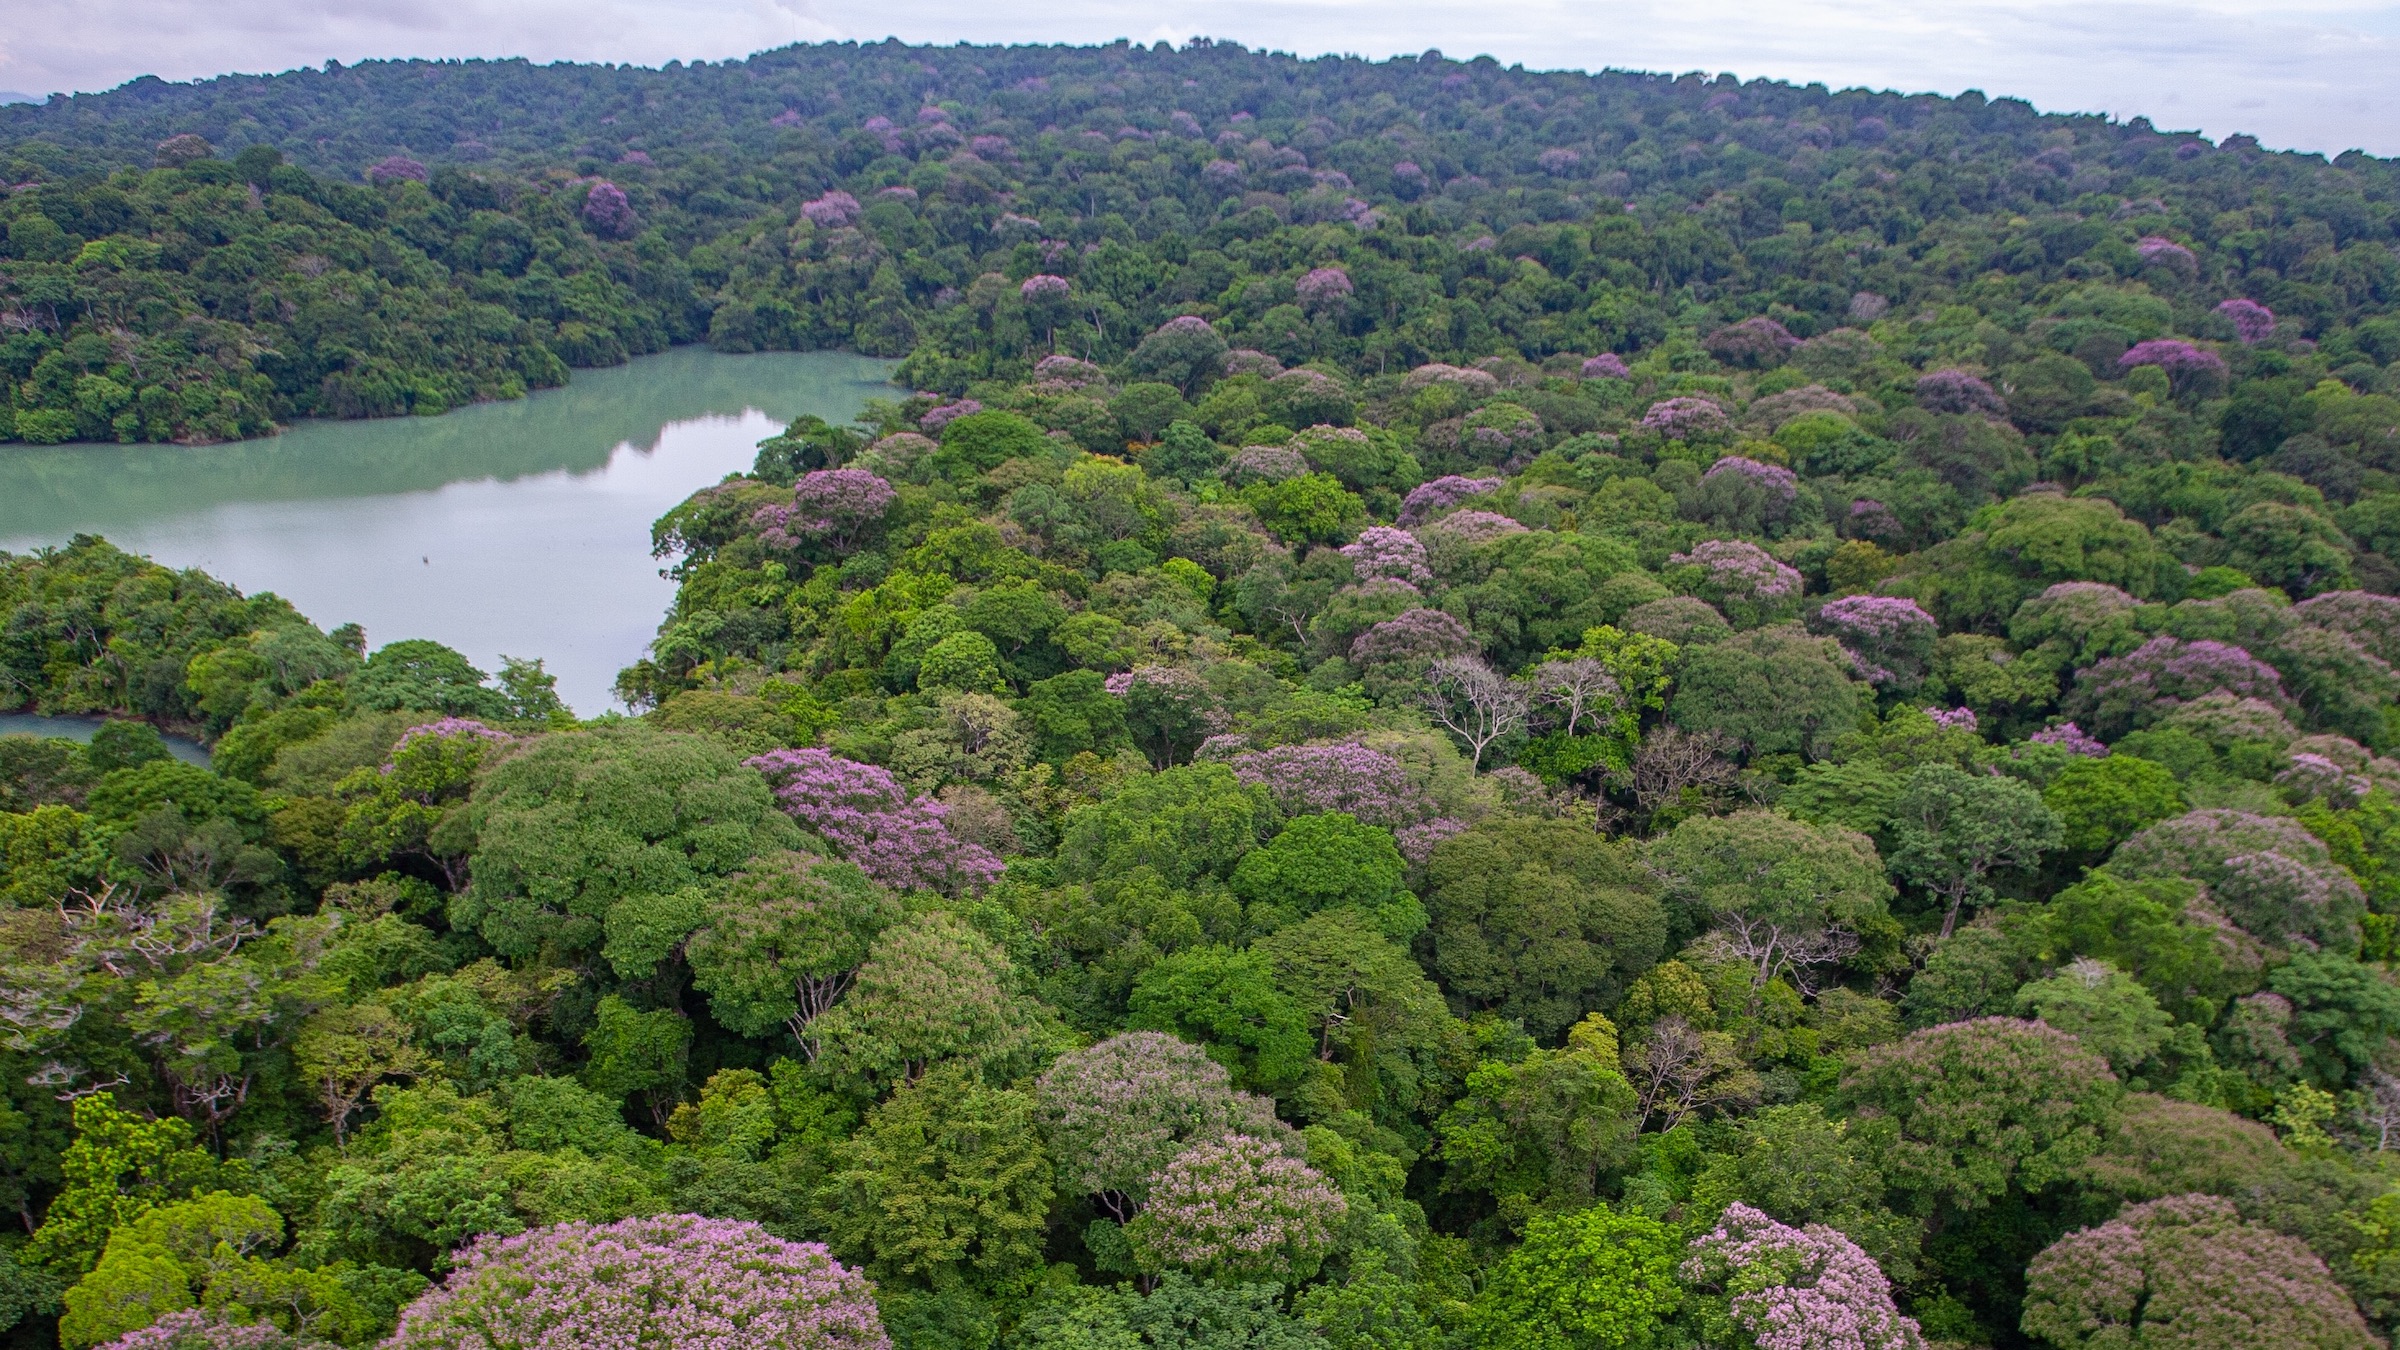 An aerial view of a forest shows trees of various species near a river